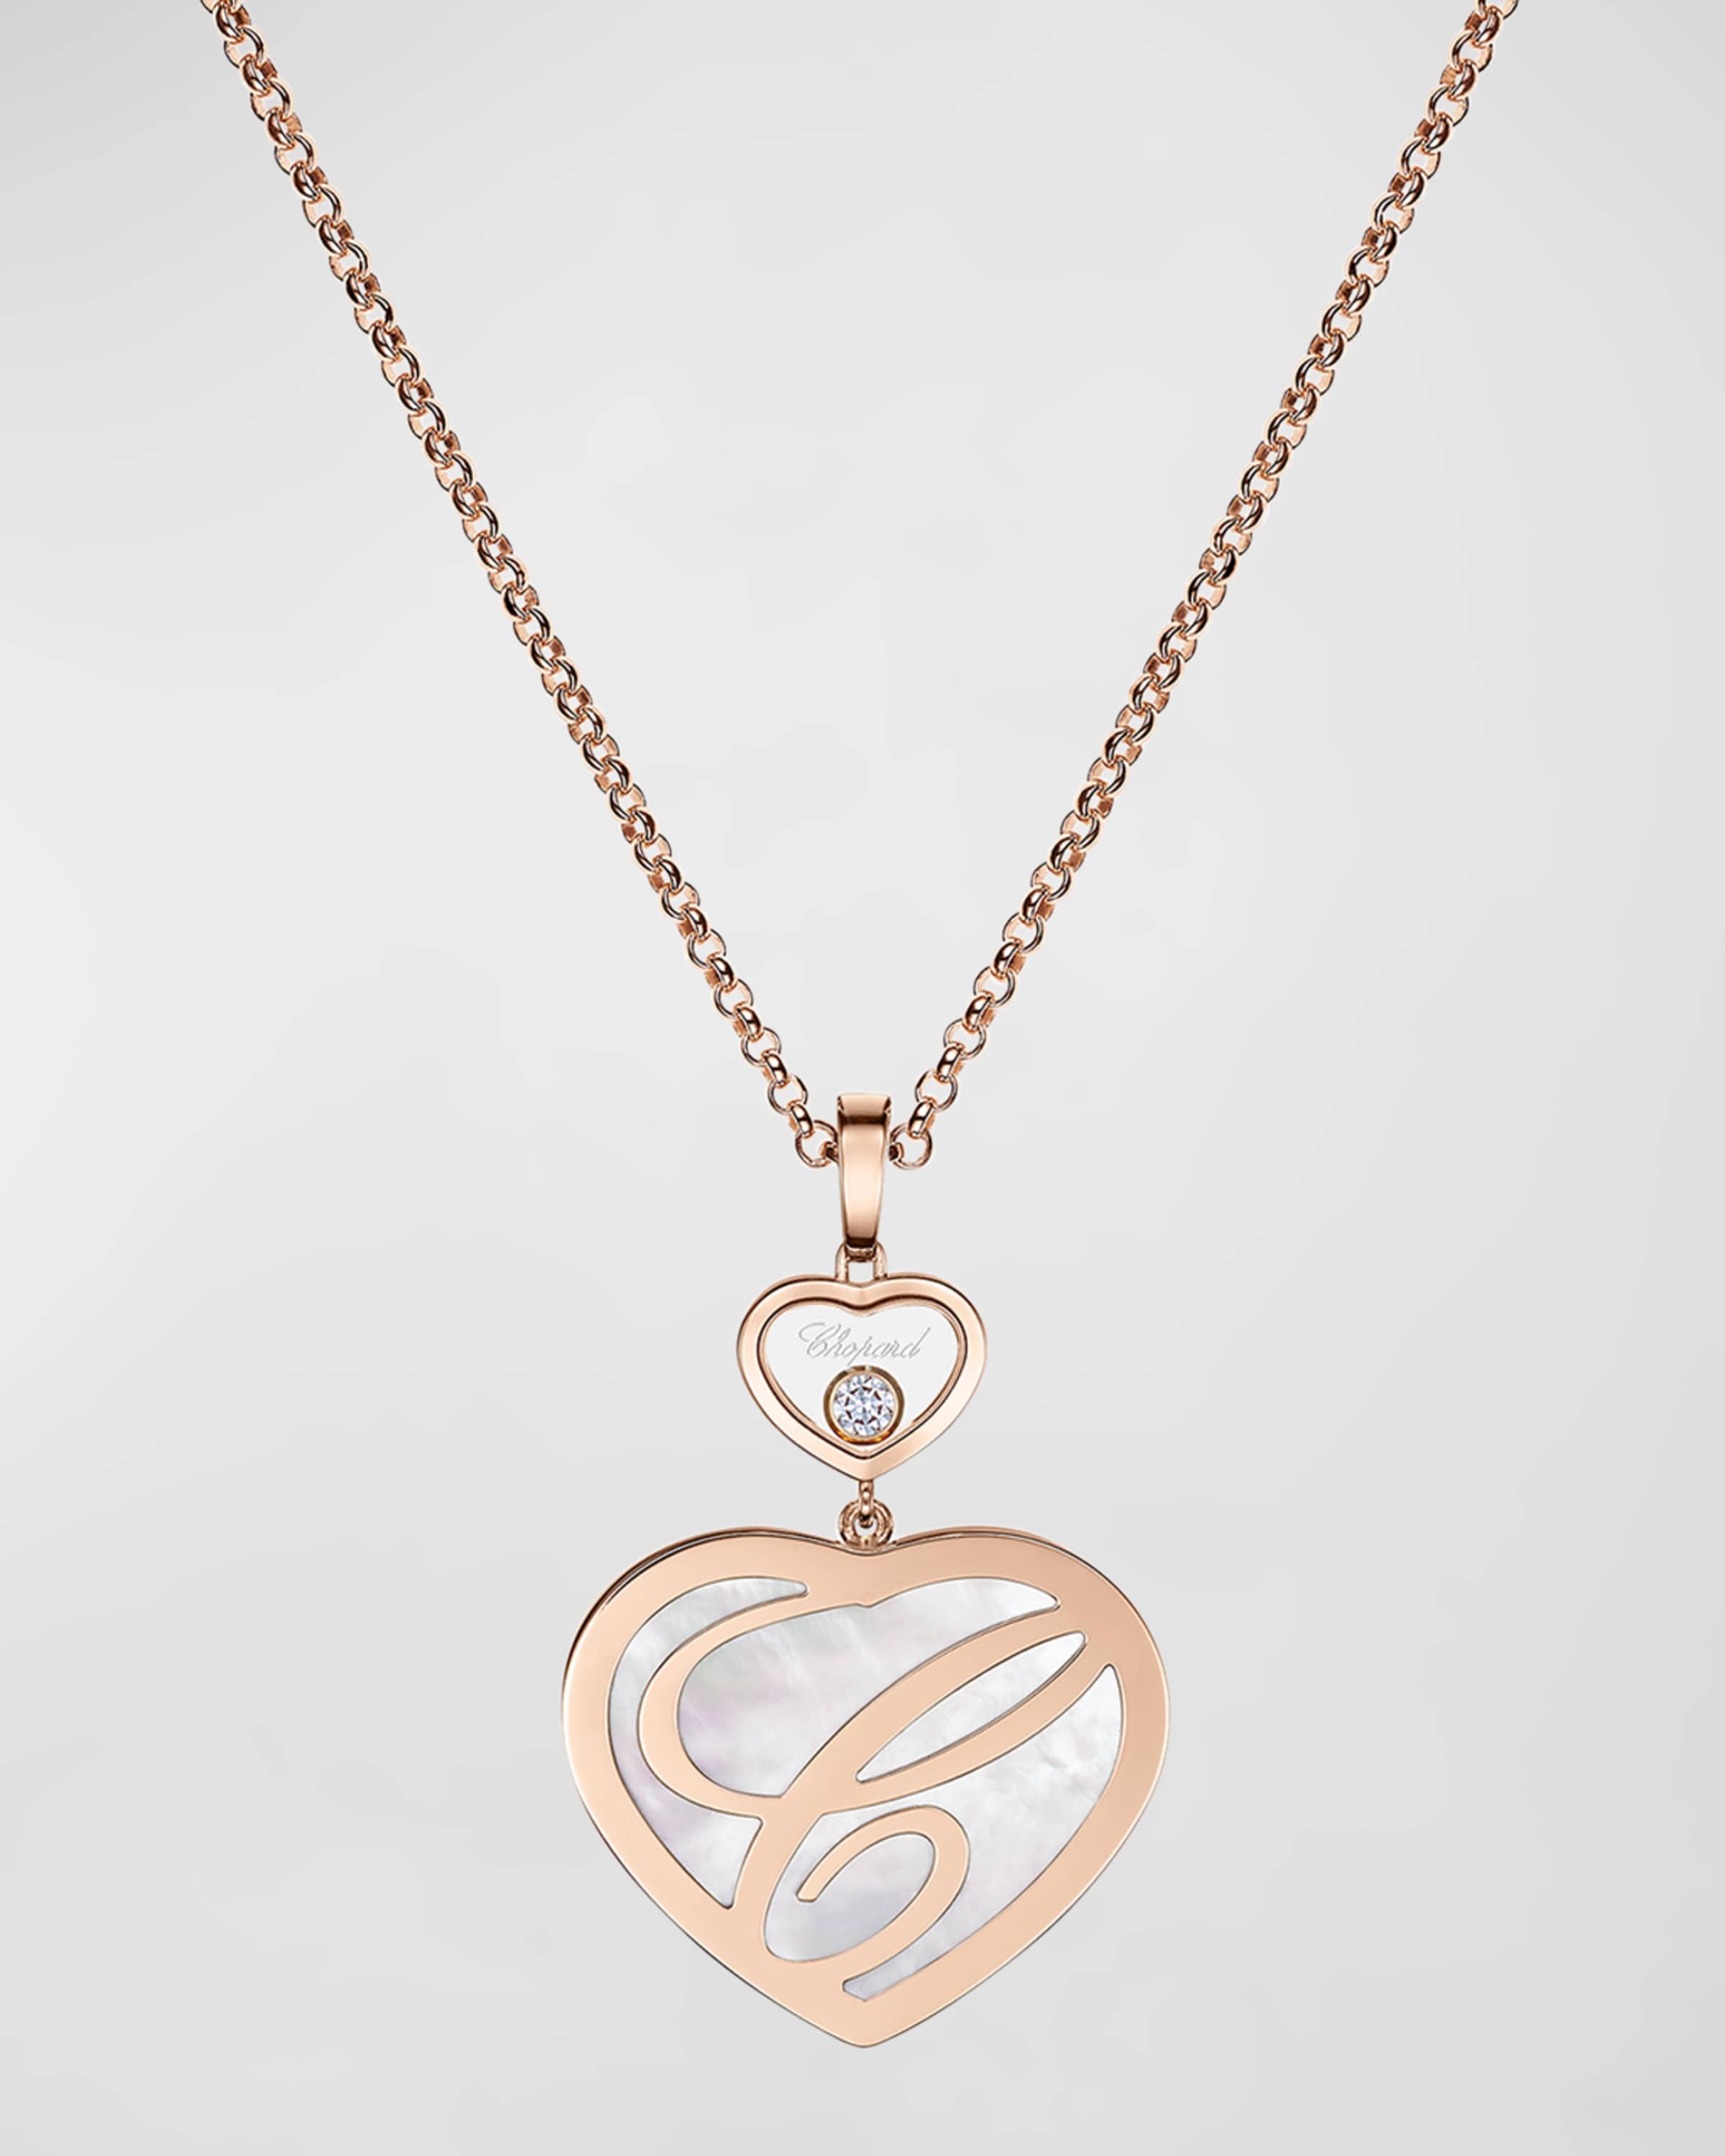 Happy Hearts 18K Rose Gold & Mother-of-Pearl Necklace with Diamond - 4